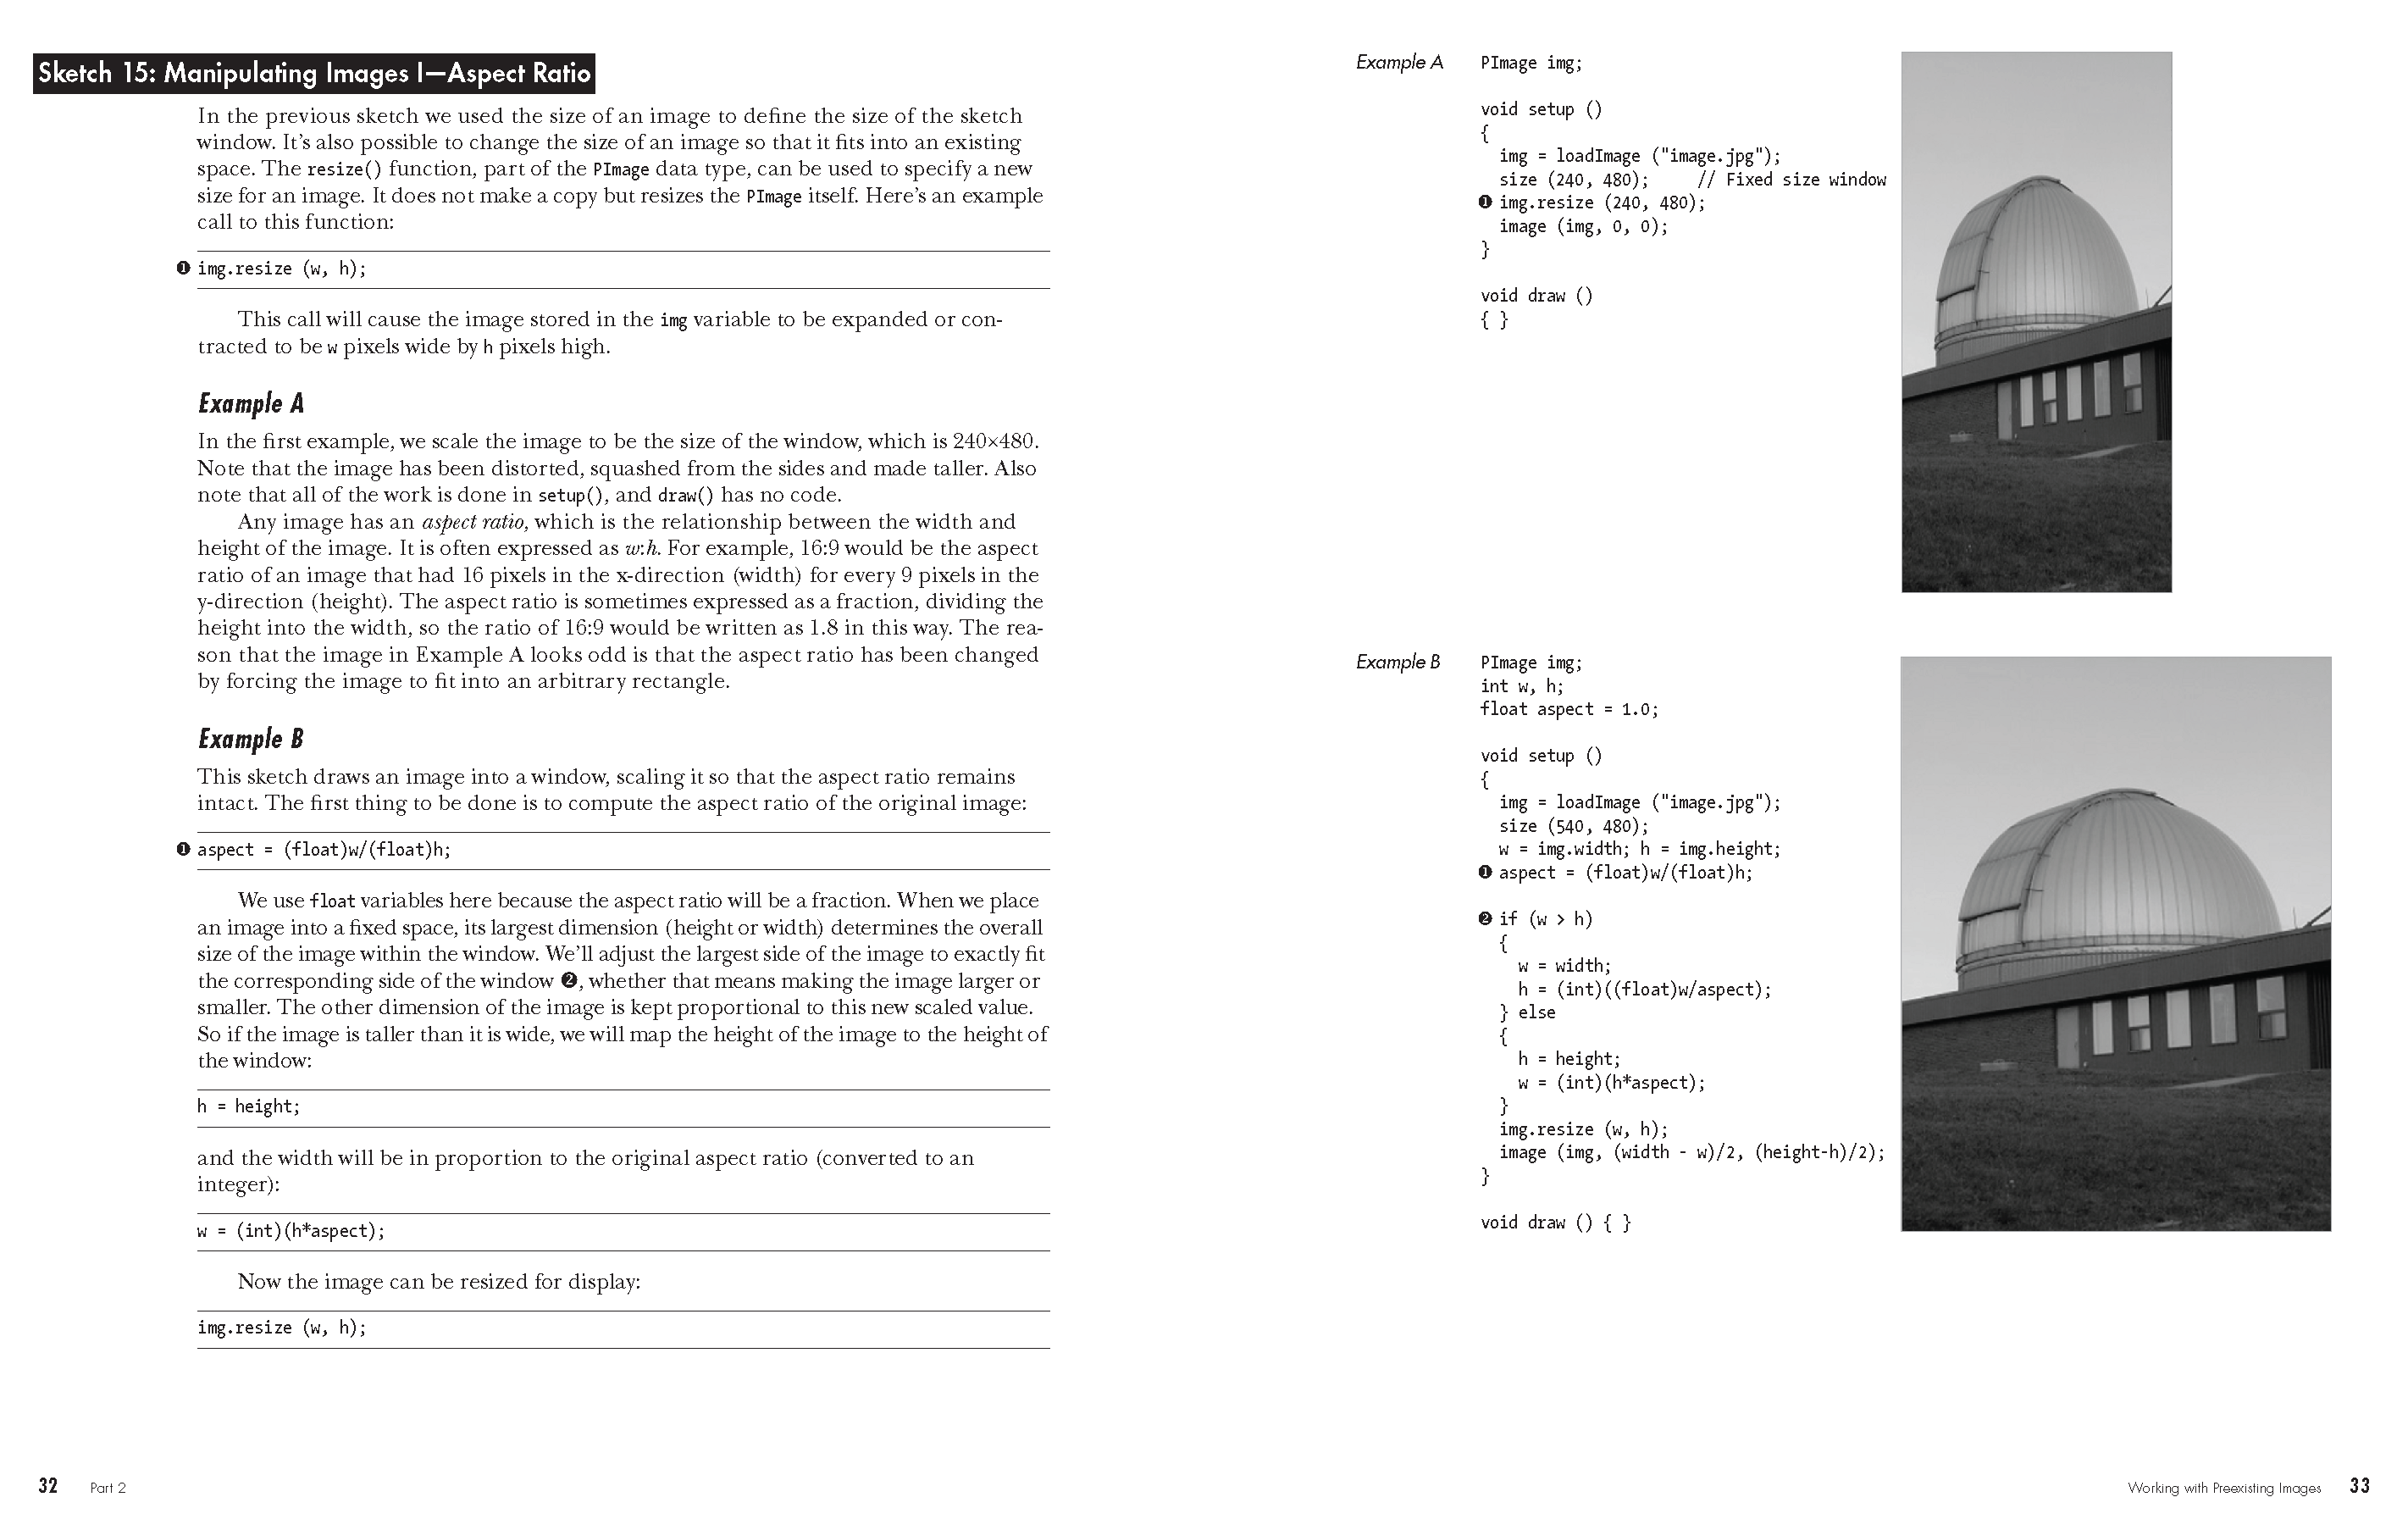 An Artist's Guide to Programming pages 32-33